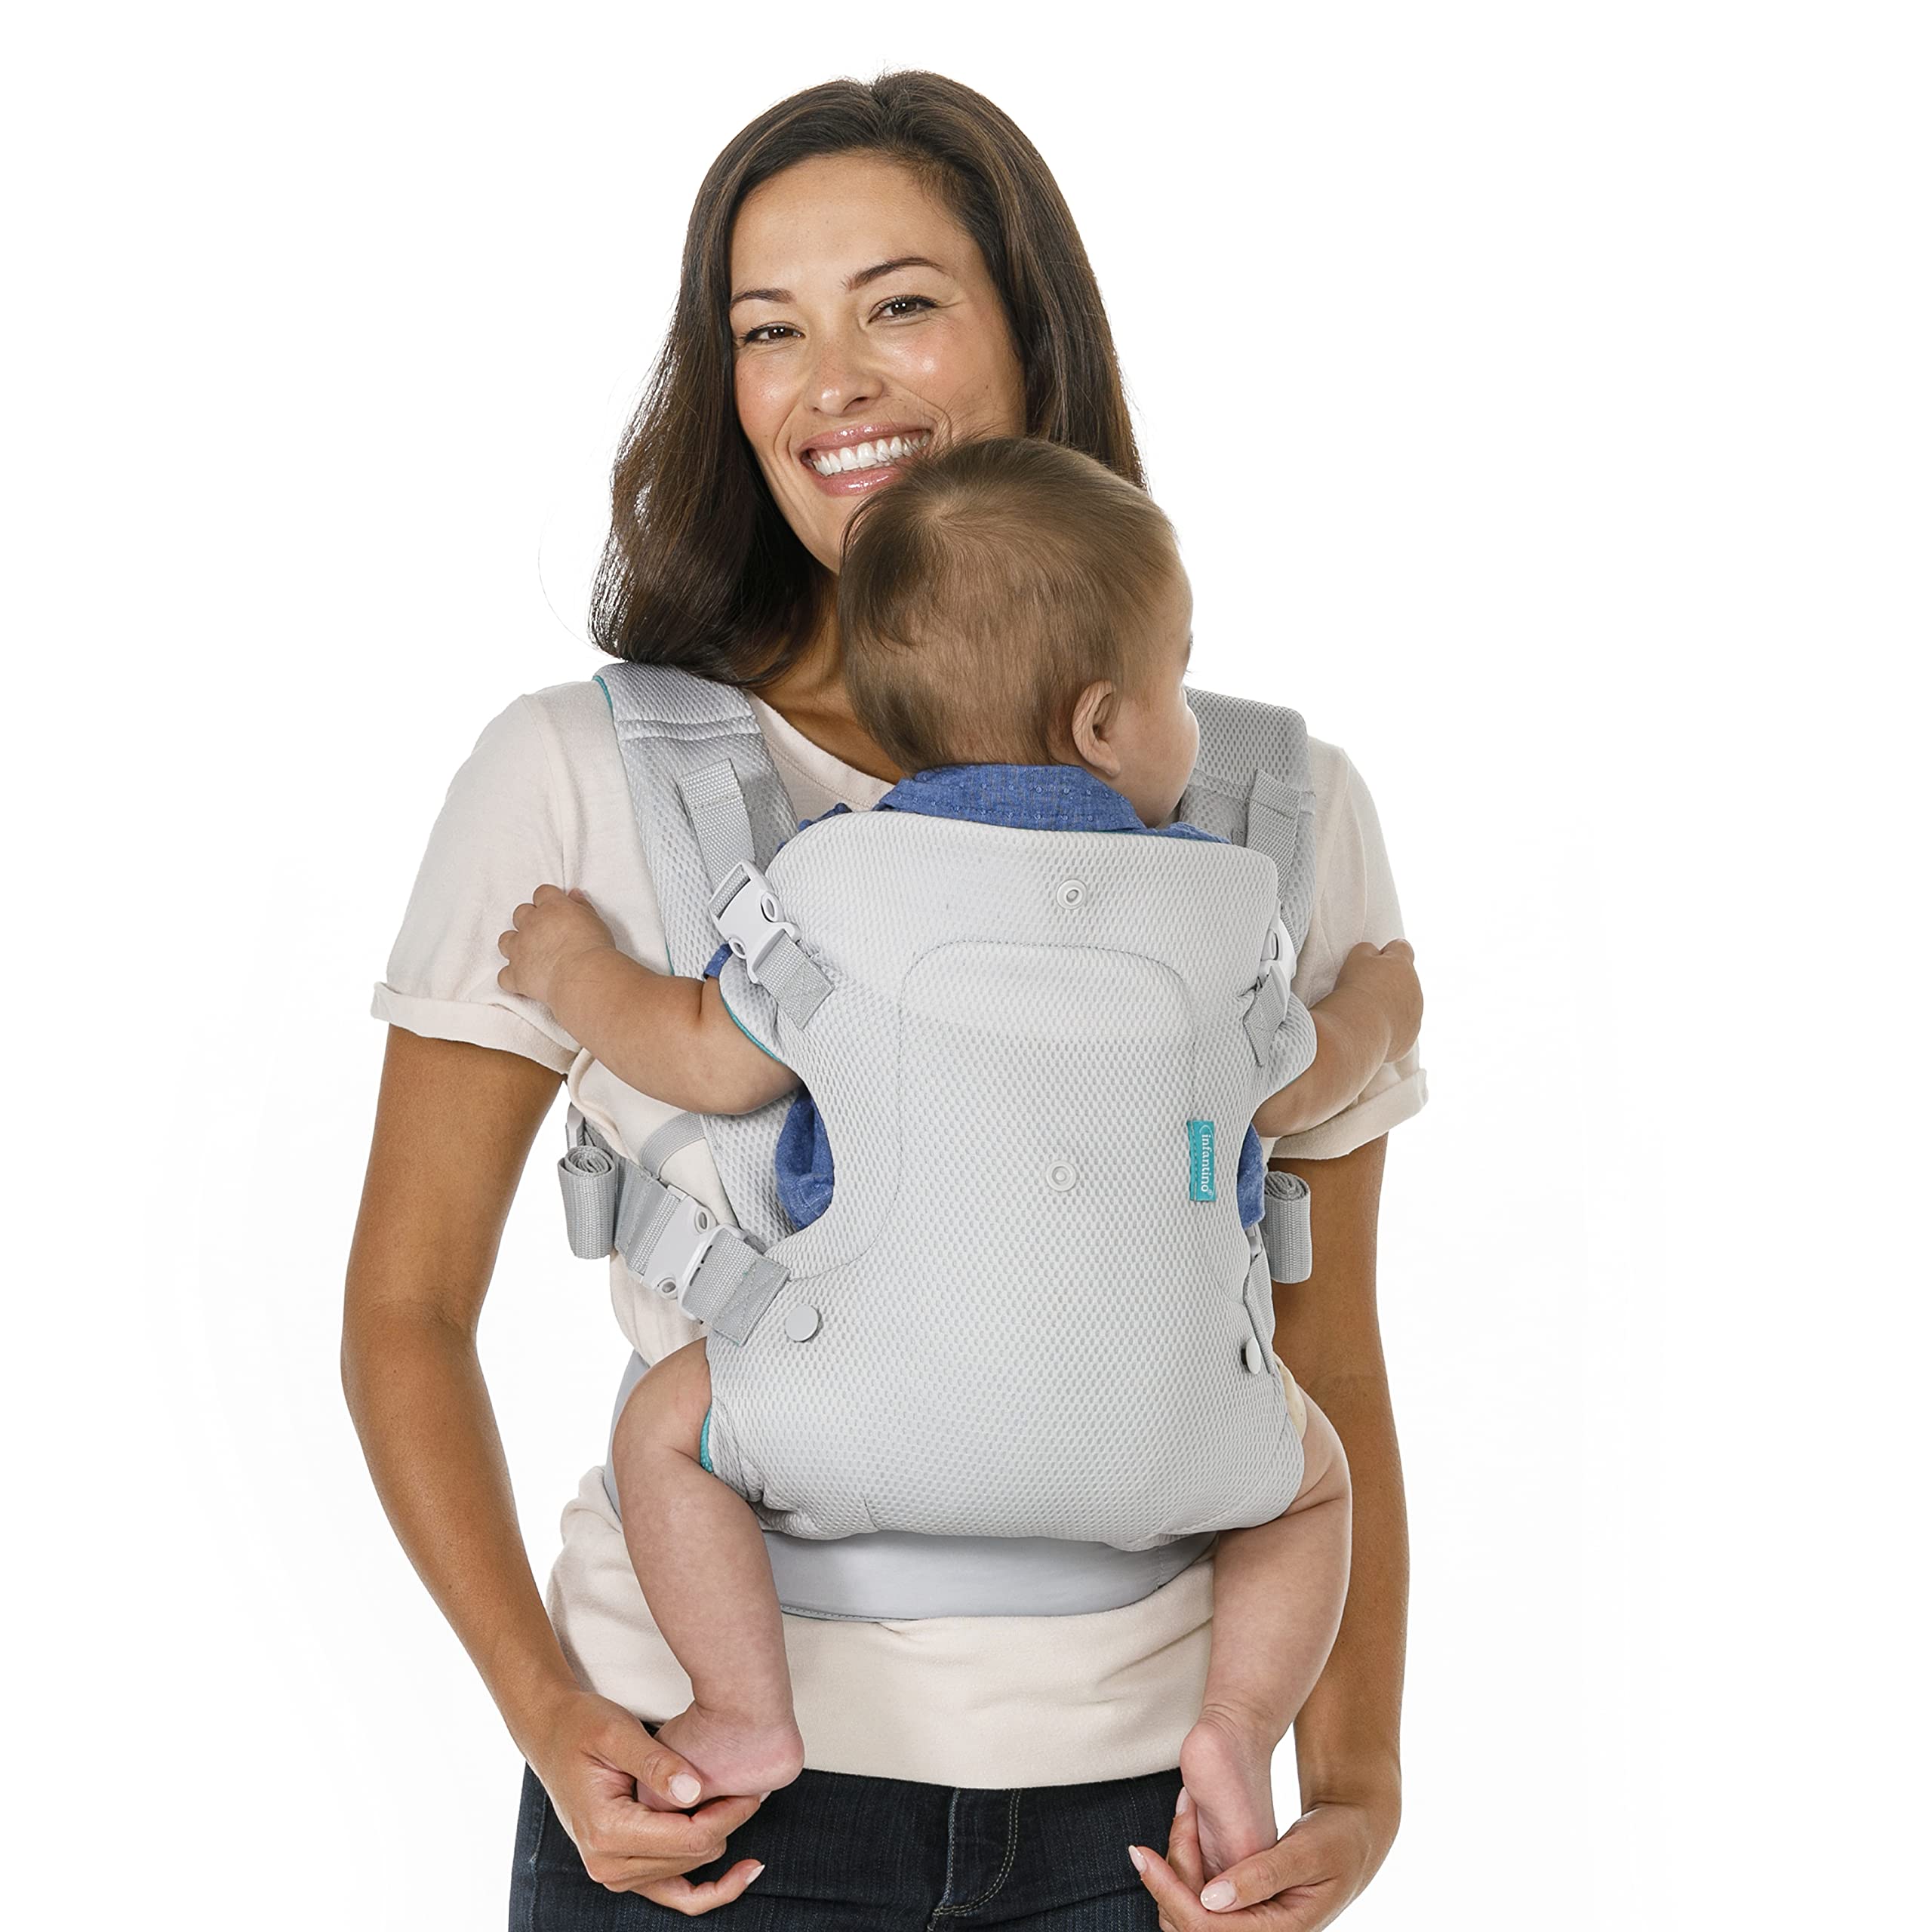 Infantino Flip 4-in-1 Light & Airy Convertible Carrier - Breathable, 4 Positions, Lumbar Support, Adjustable Waist Belt, Head Support, Ergonomic Seat, Adjustable Waistband, Plush Straps